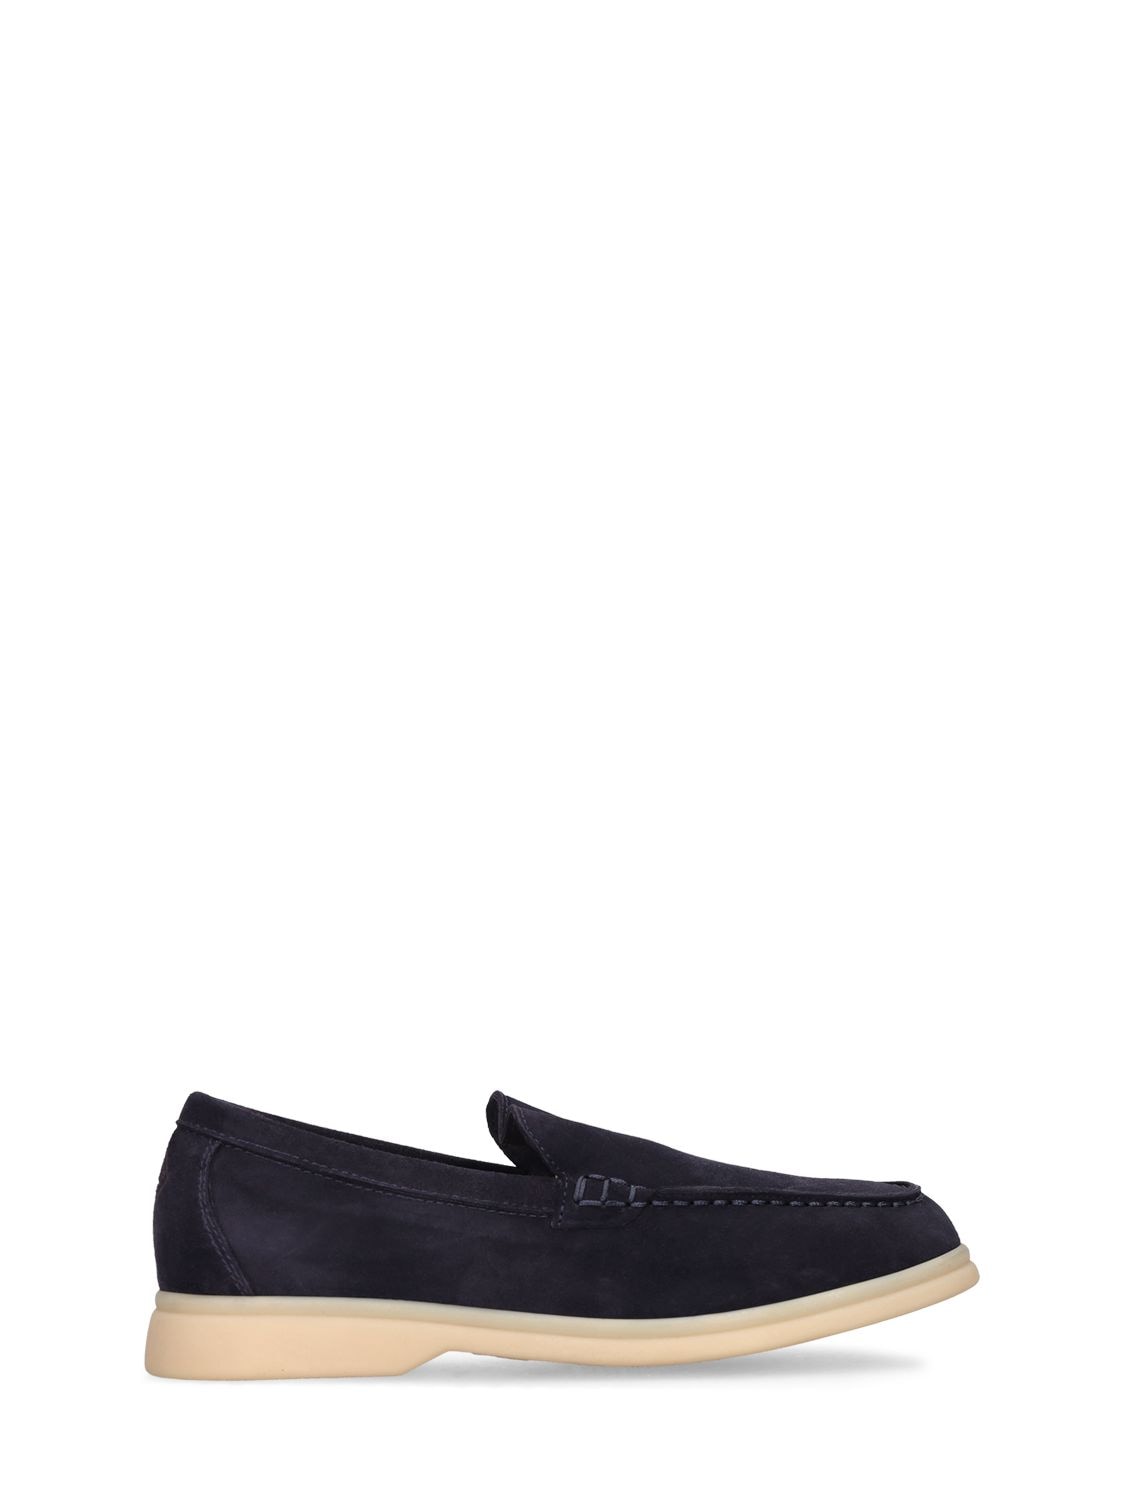 Image of Open Walk Suede Loafers